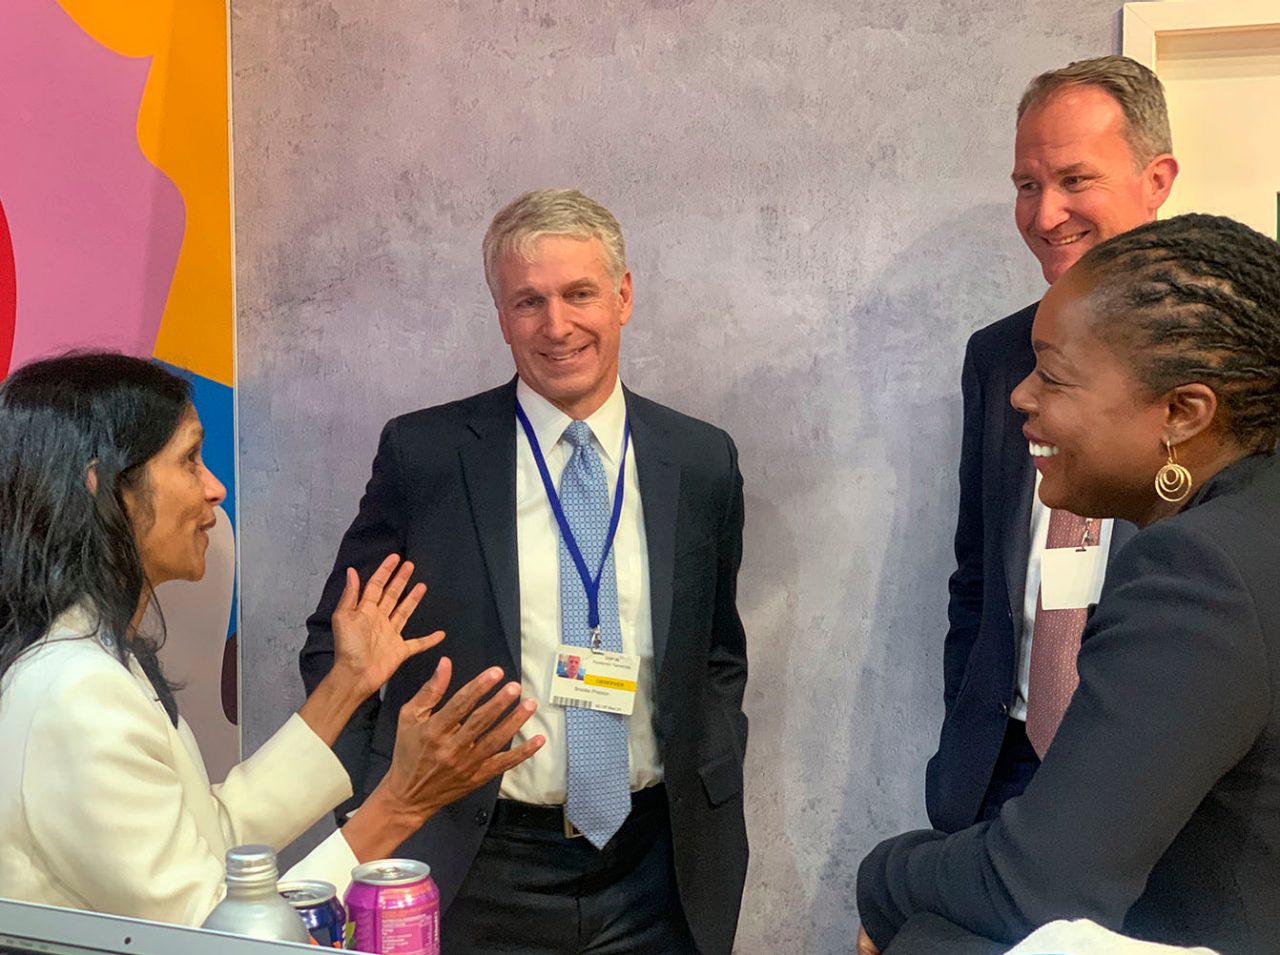 Shemara Wikramanayake; Brooks Preston, Managing Director, Macquarie Asset Management; and Leigh Harrison, Head of Real Assets, Macquarie Asset Management, spoke with Nili Gilbert from the United Nations-convened Net Zero Asset Owner Alliance and David Rockefeller Fund. 